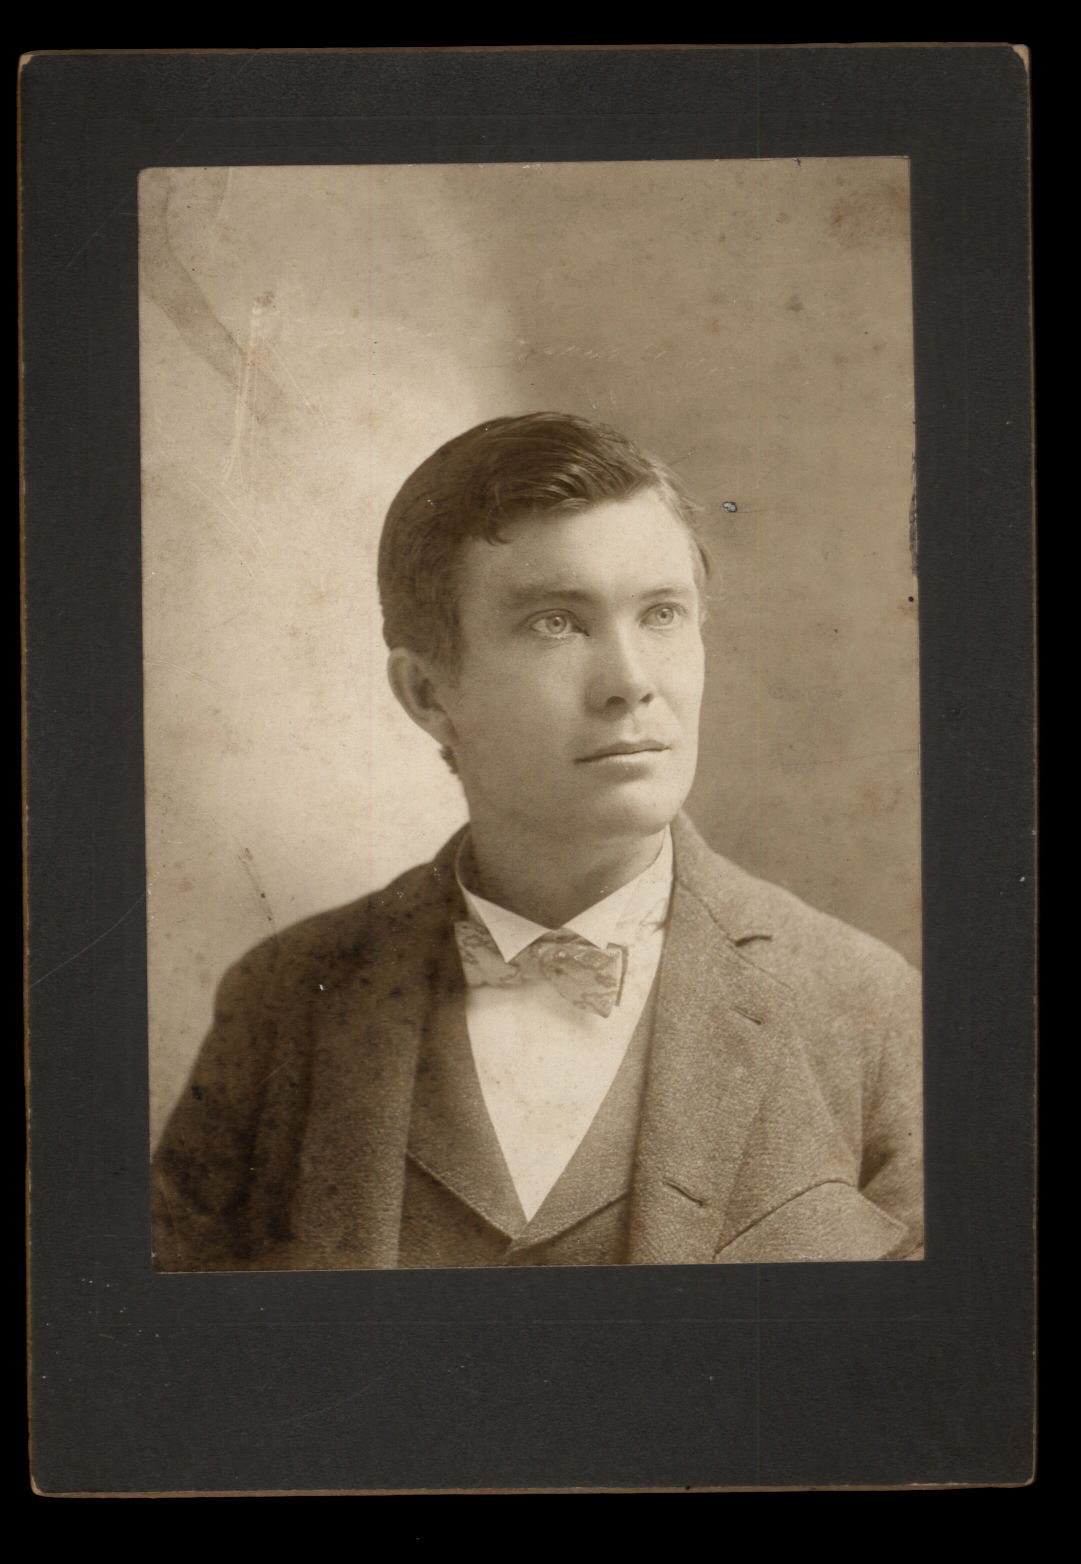 from ALBUM * CABINET CARD PHOTO William James Ashton 1871-1927 Young Man